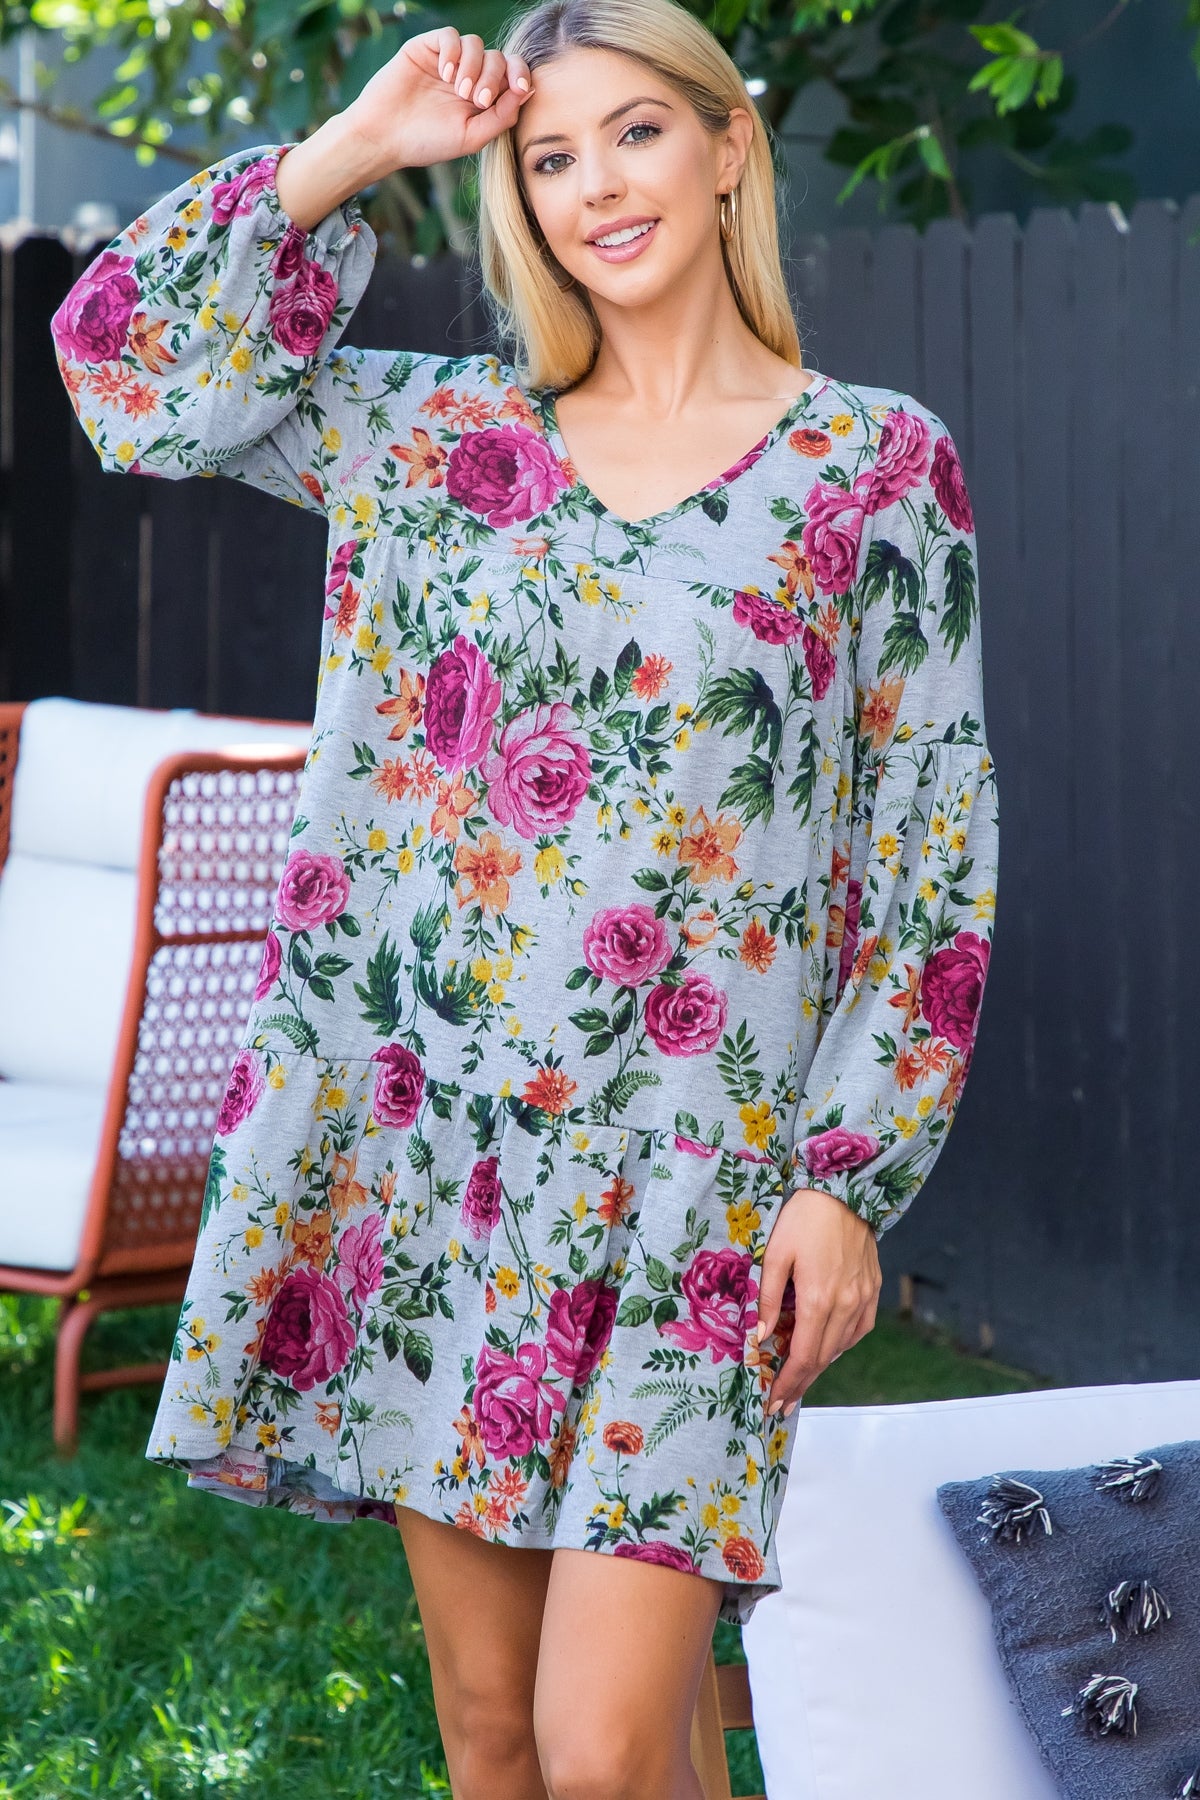 GREY FLORAL LONG SLEEVE DRESS (NOW $3.00 ONLY!)